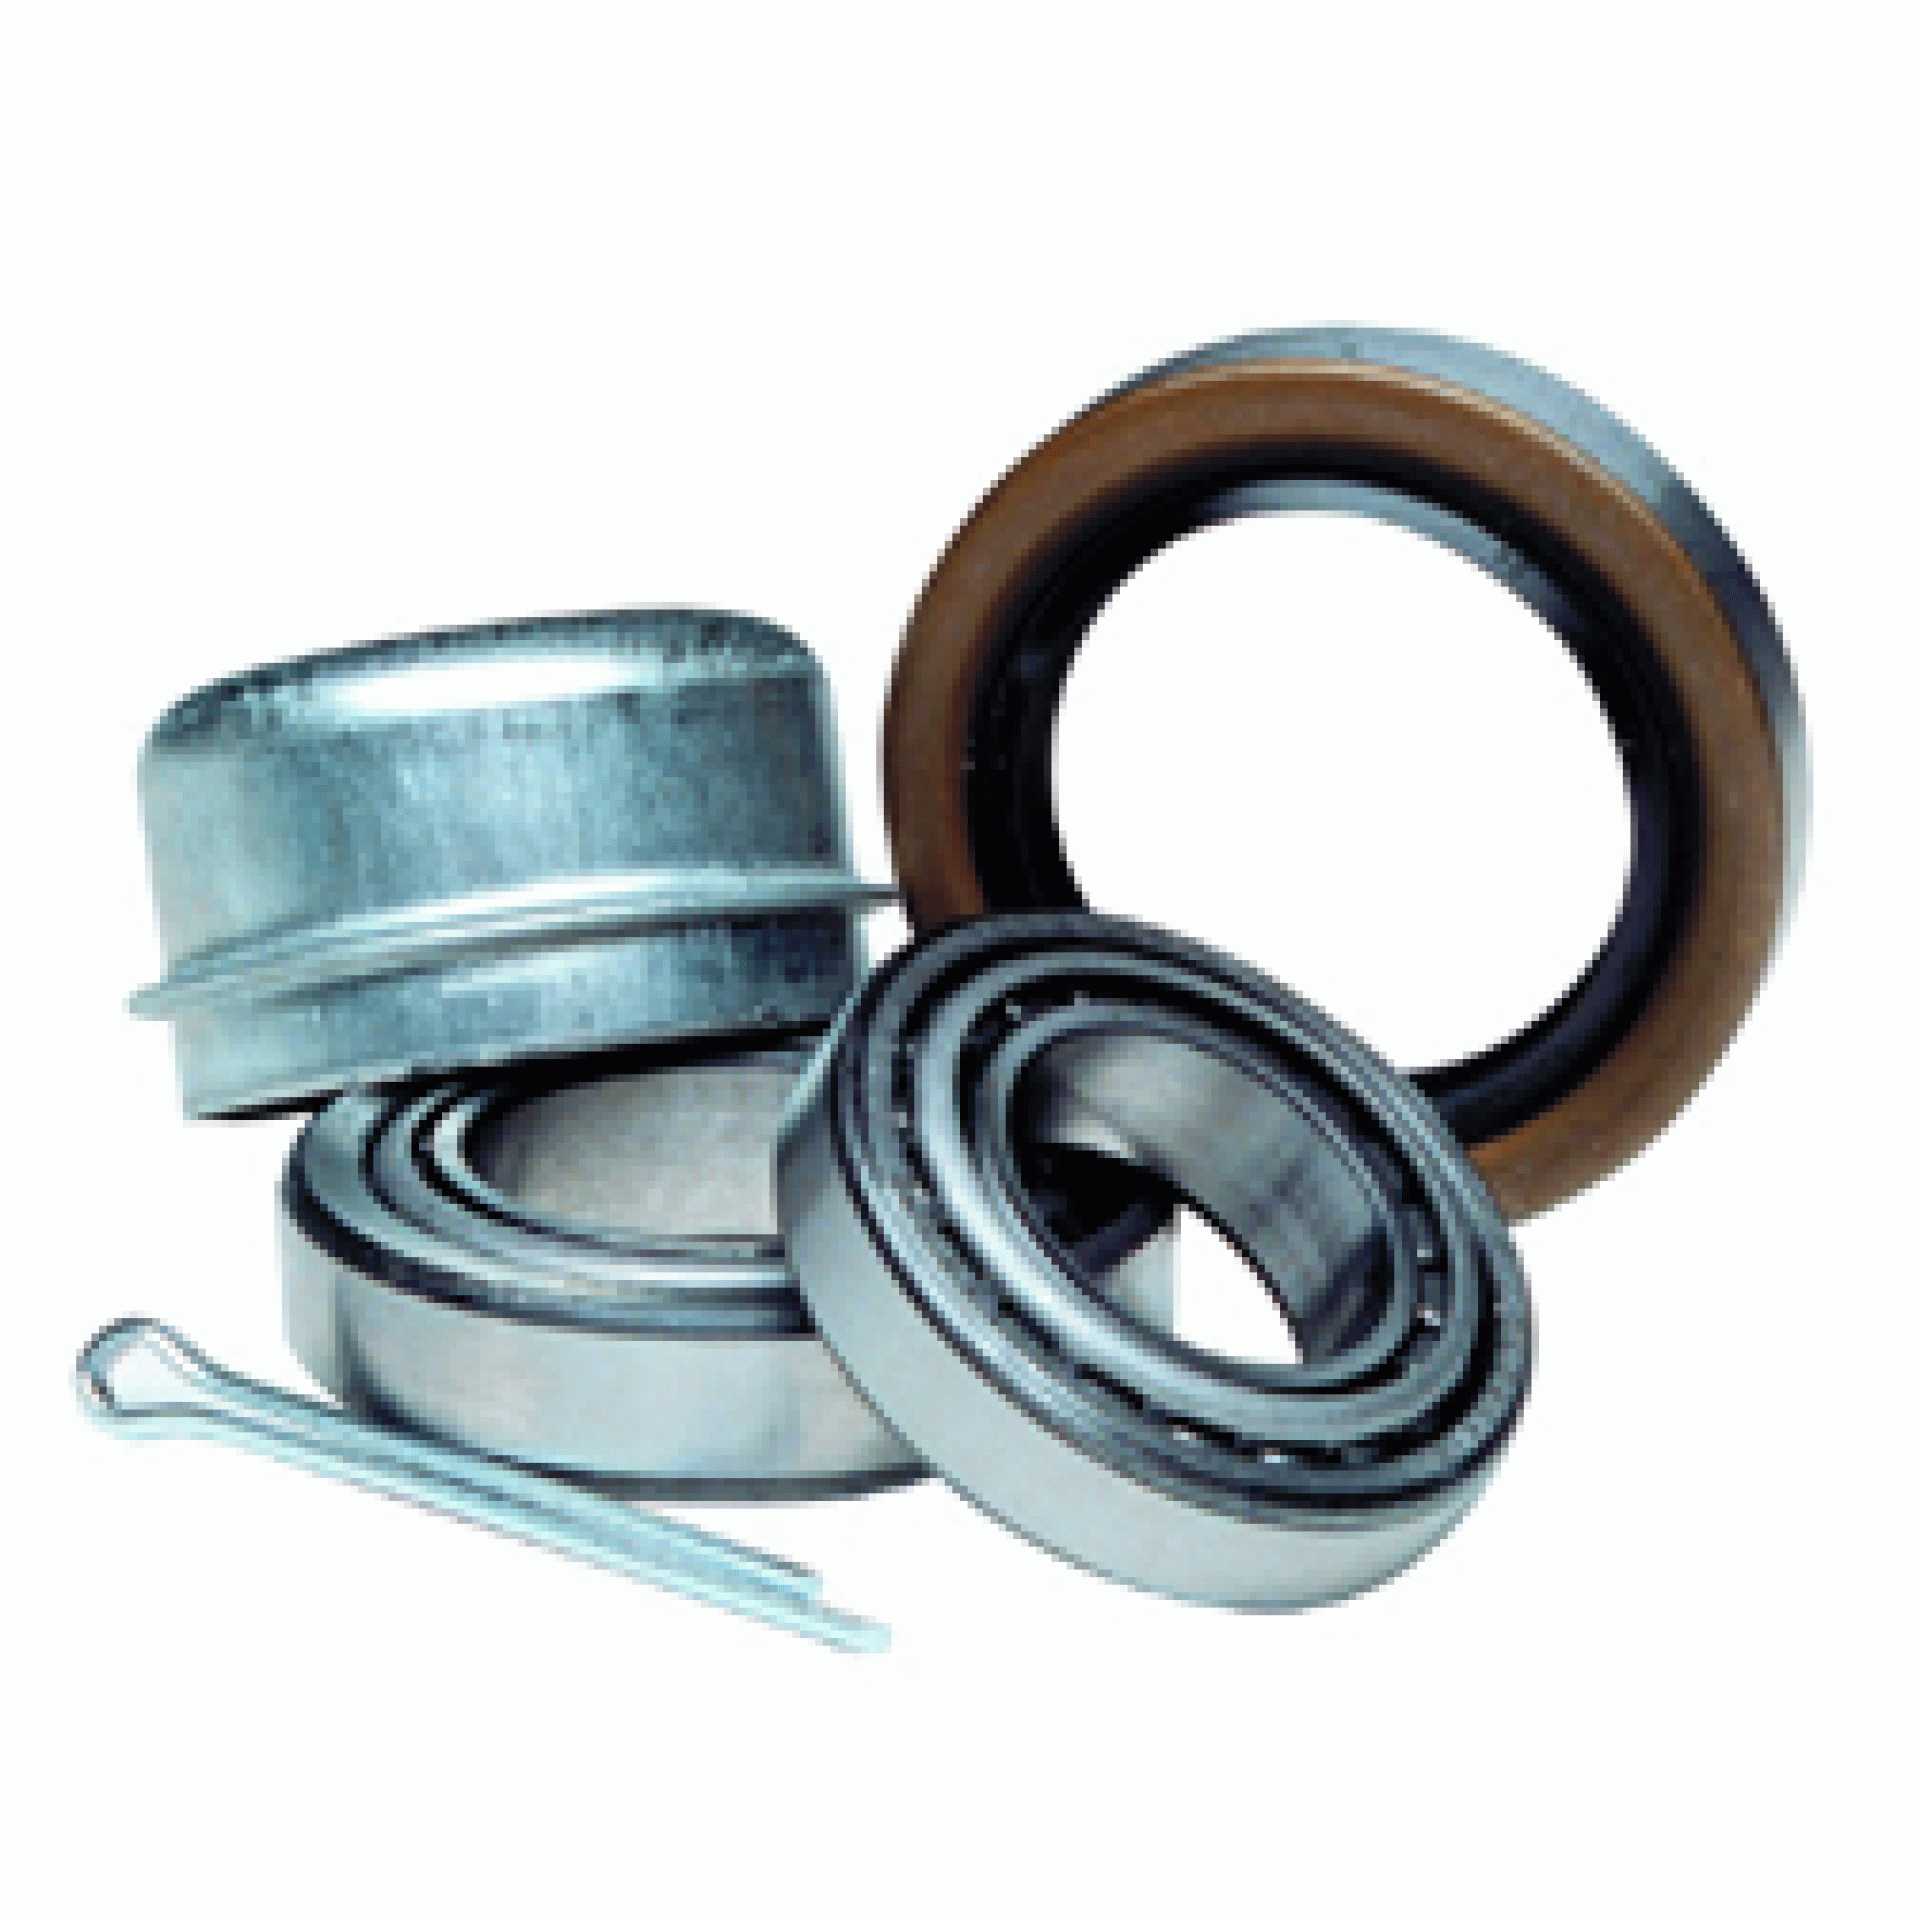 DEXTER MARINE PRODUCTS OF GEORGIA LC | K71-G02-53 | BEARING KIT- 1-3/8" X 1-1/16" TAPERED SPINDLE W/ DUST CAP L44649 & L68149 CONE L44610 & L68111 CUP